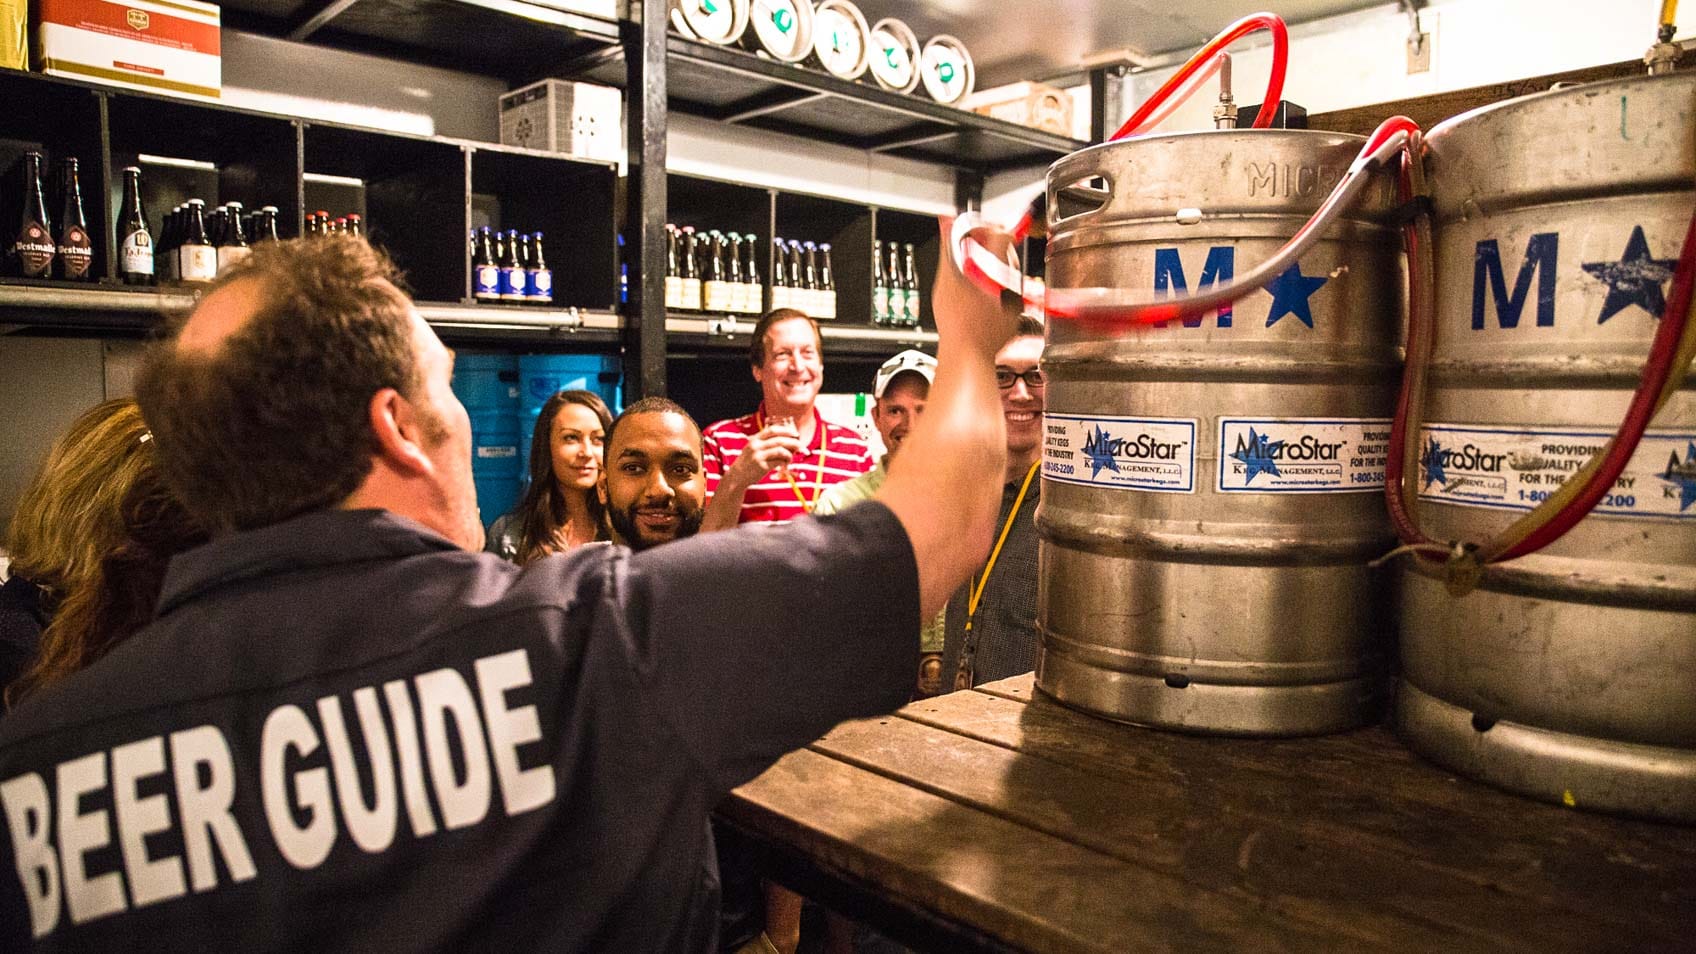 City Brew Tours beer guide leading a behind-the-scenes tour